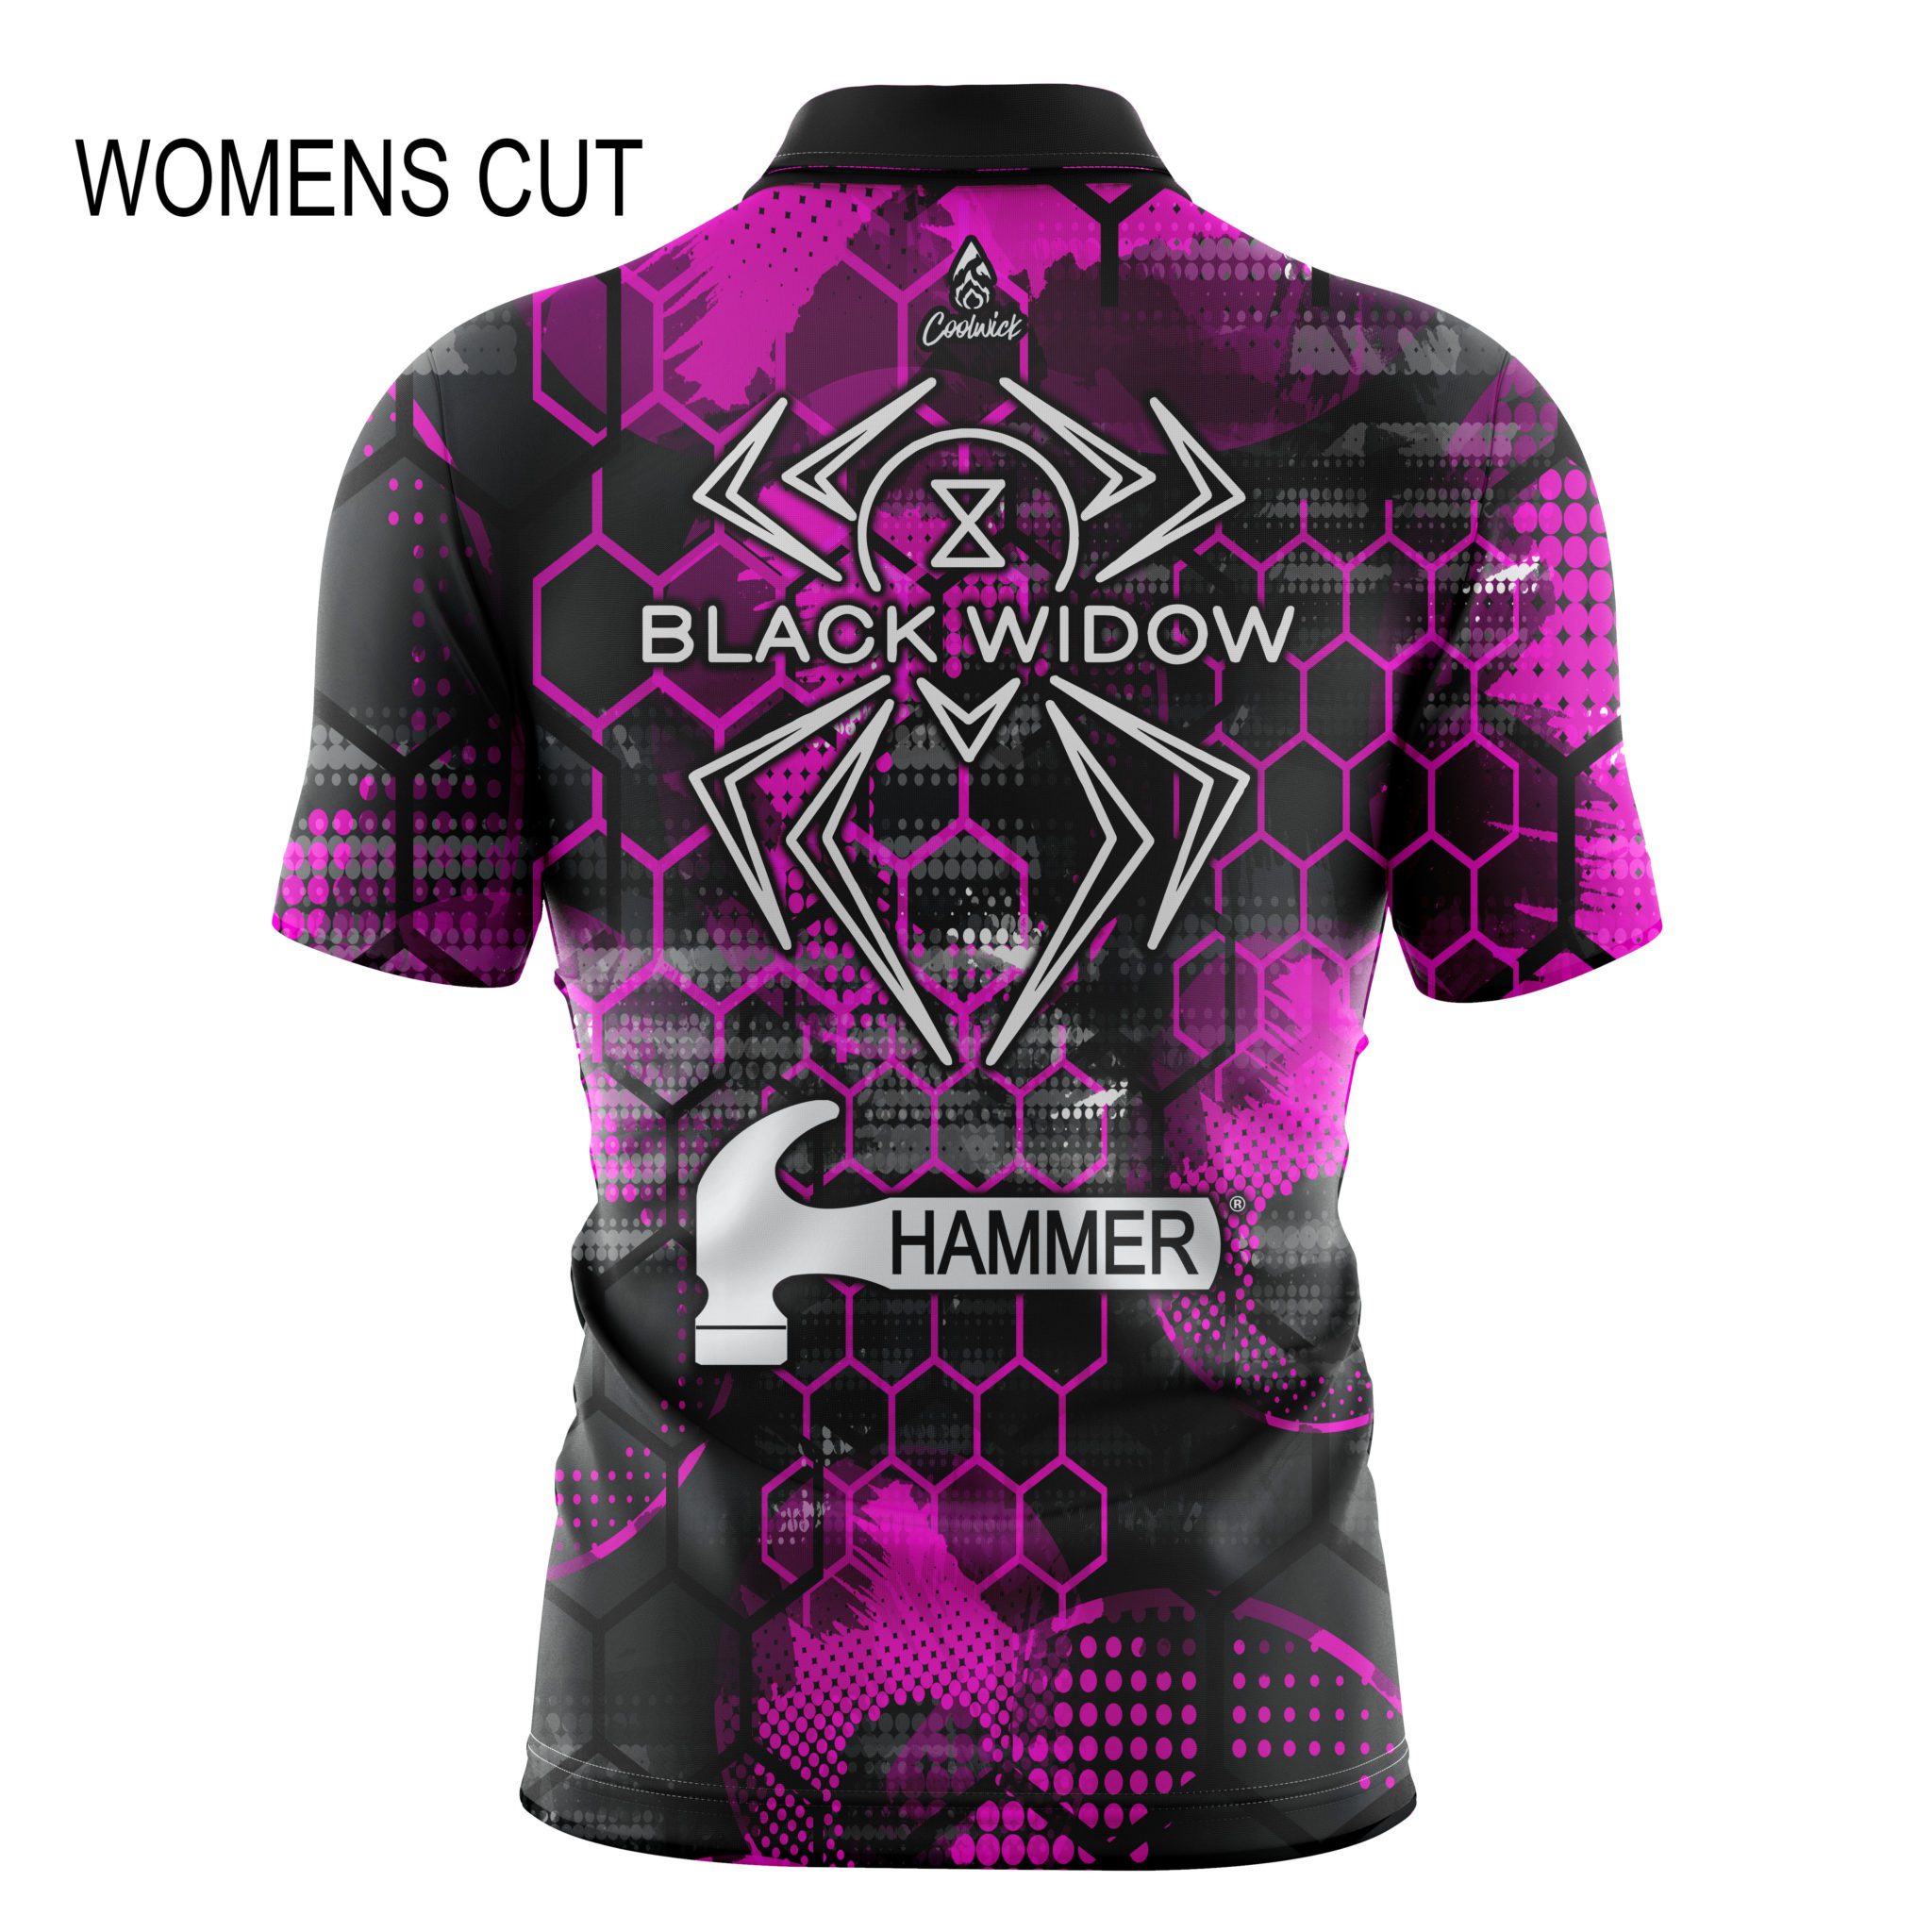 Hammer Black Widow Pink Honeycomb Womens Quick Ship CoolWick Sash Zip  Bowling Jersey - Coolwick Bowling Apparel